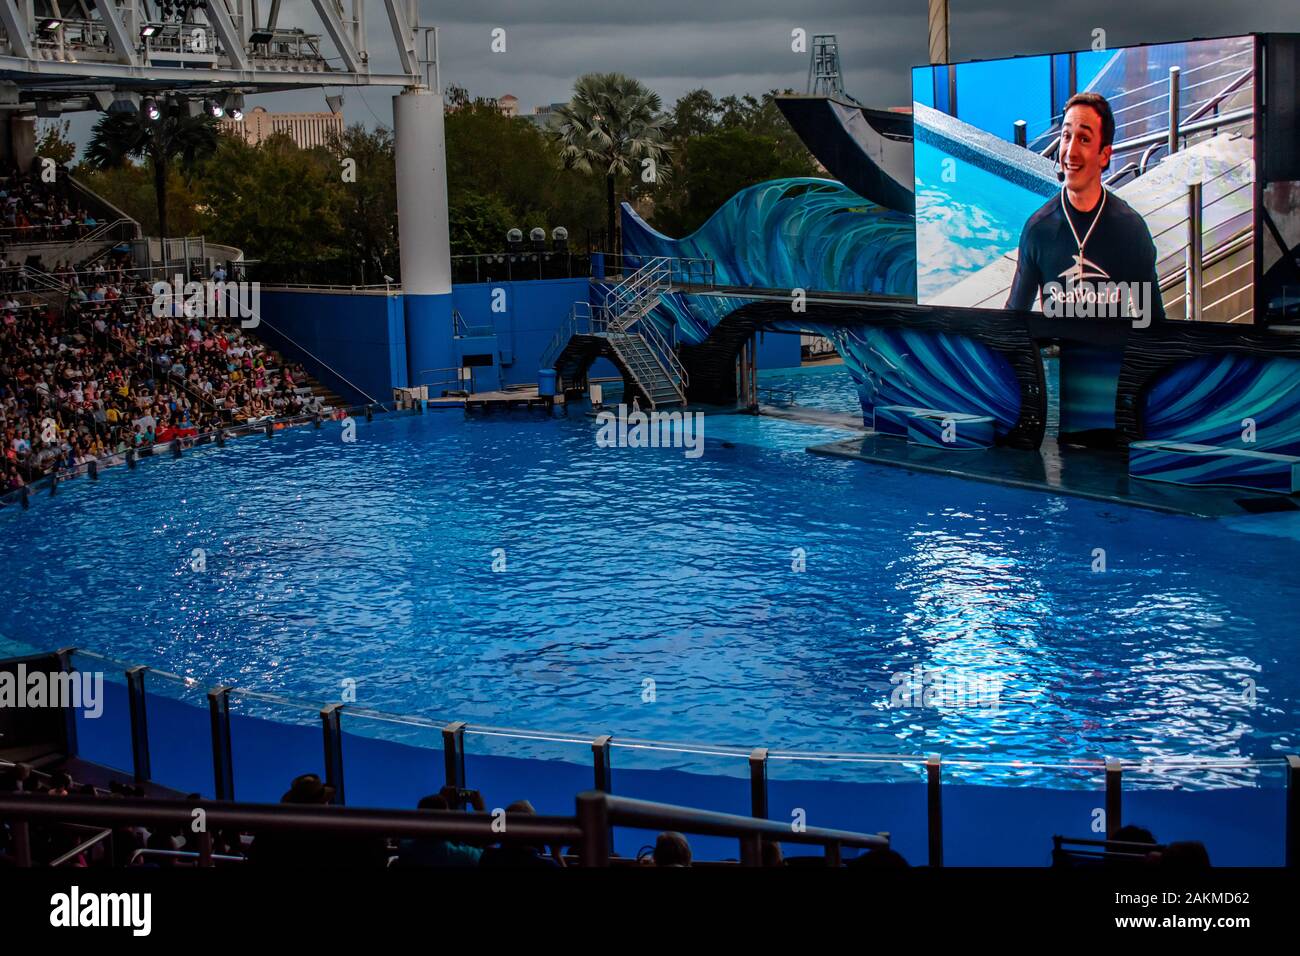 Orlando, Florida. December 30, 2019. Trainer speaking in Orca Encounter Show at Seaworld Stock Photo